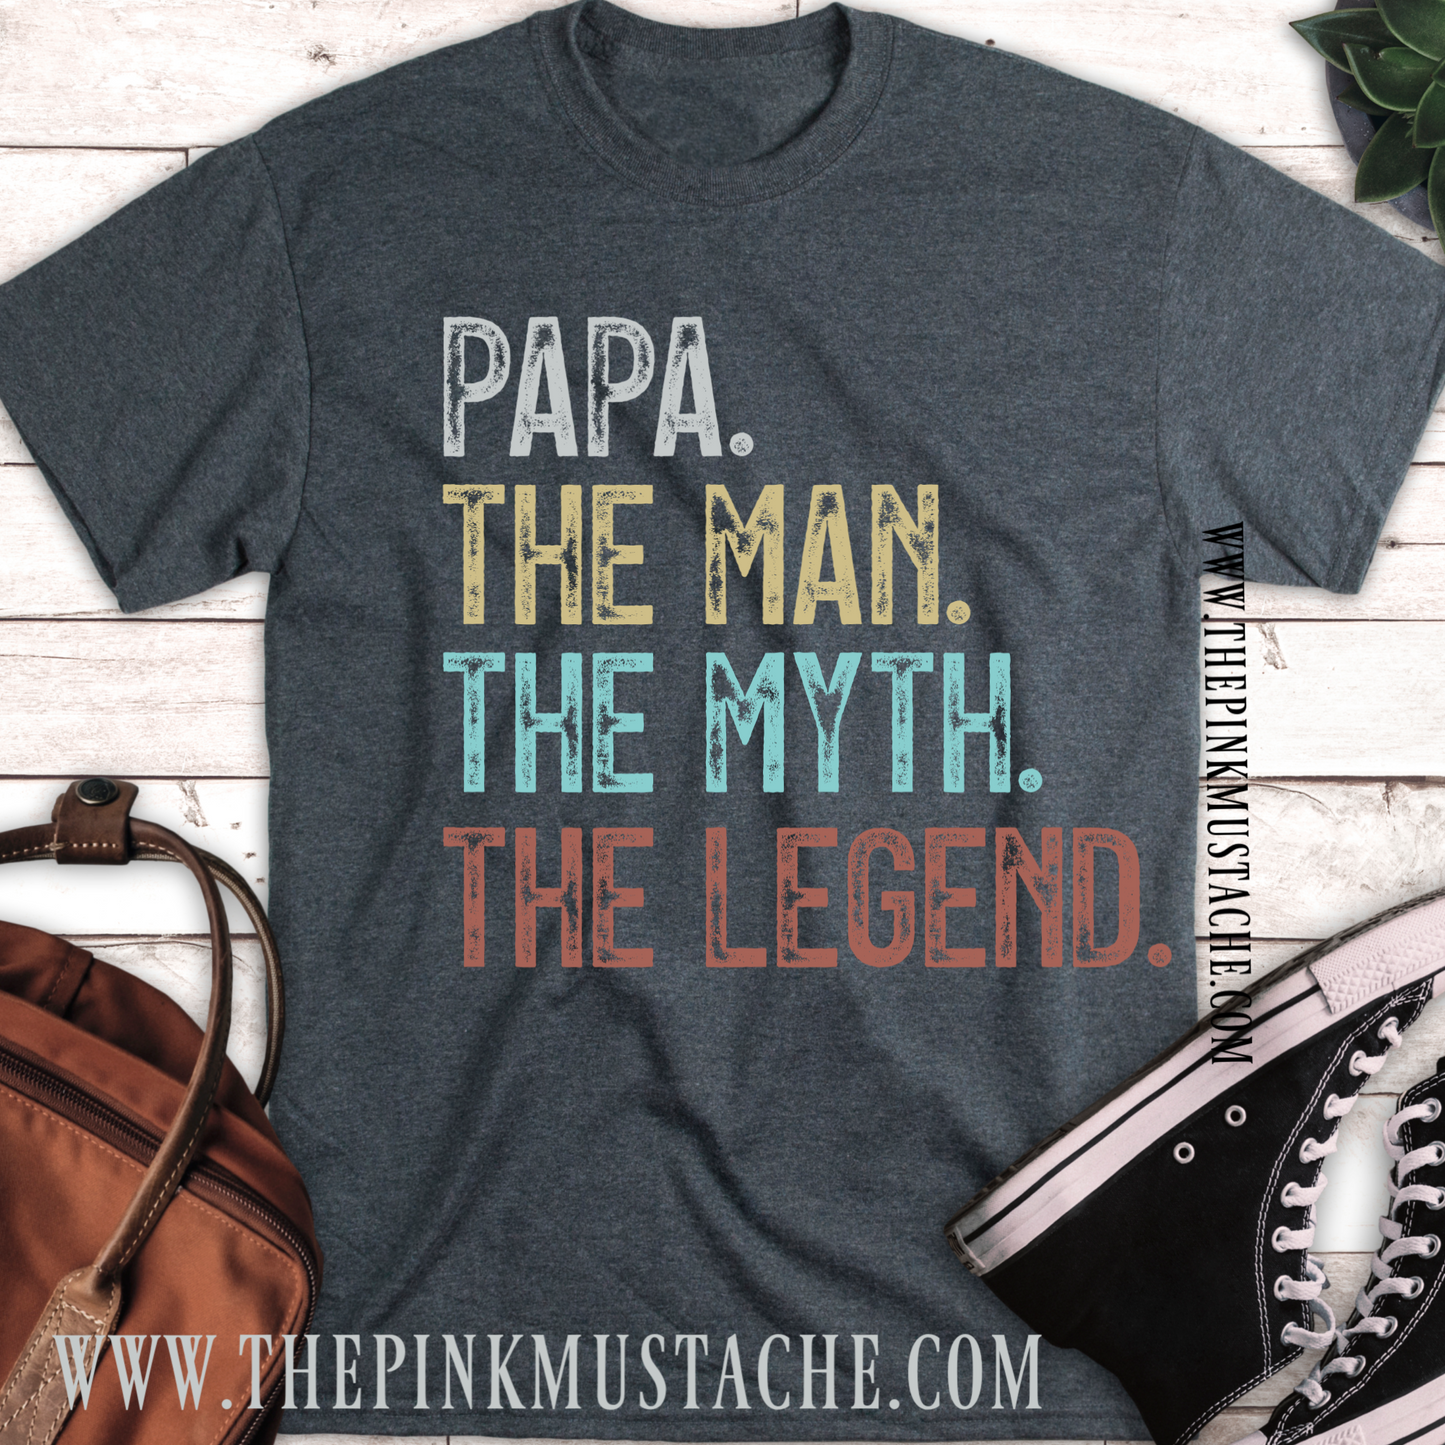 Father's Day Shirt / Papa, The Man, The Myth, The Legend